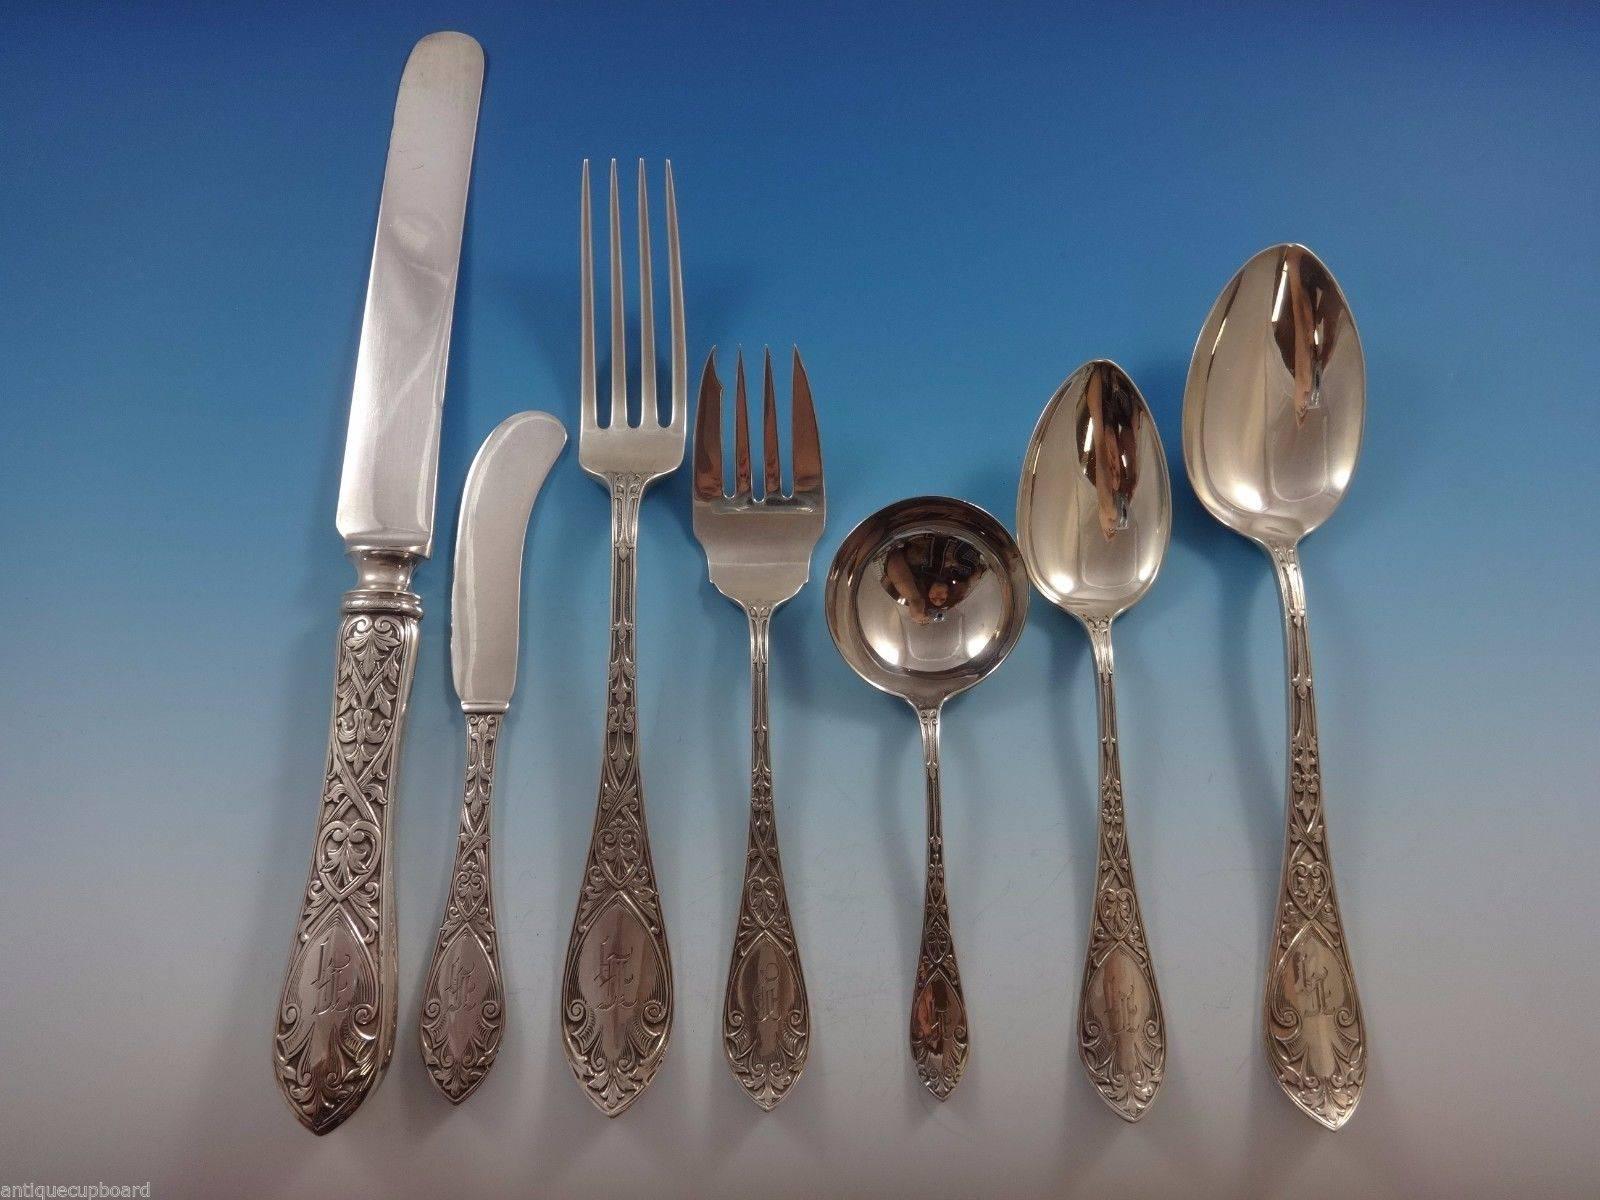 Beautiful Orleans by Watson sterling silver flatware set of dinner size 56 pieces. This scarce, circa 1915, pattern is a lost art in sterling flatware! This set includes:

Eight dinner size knives, 9 7/8